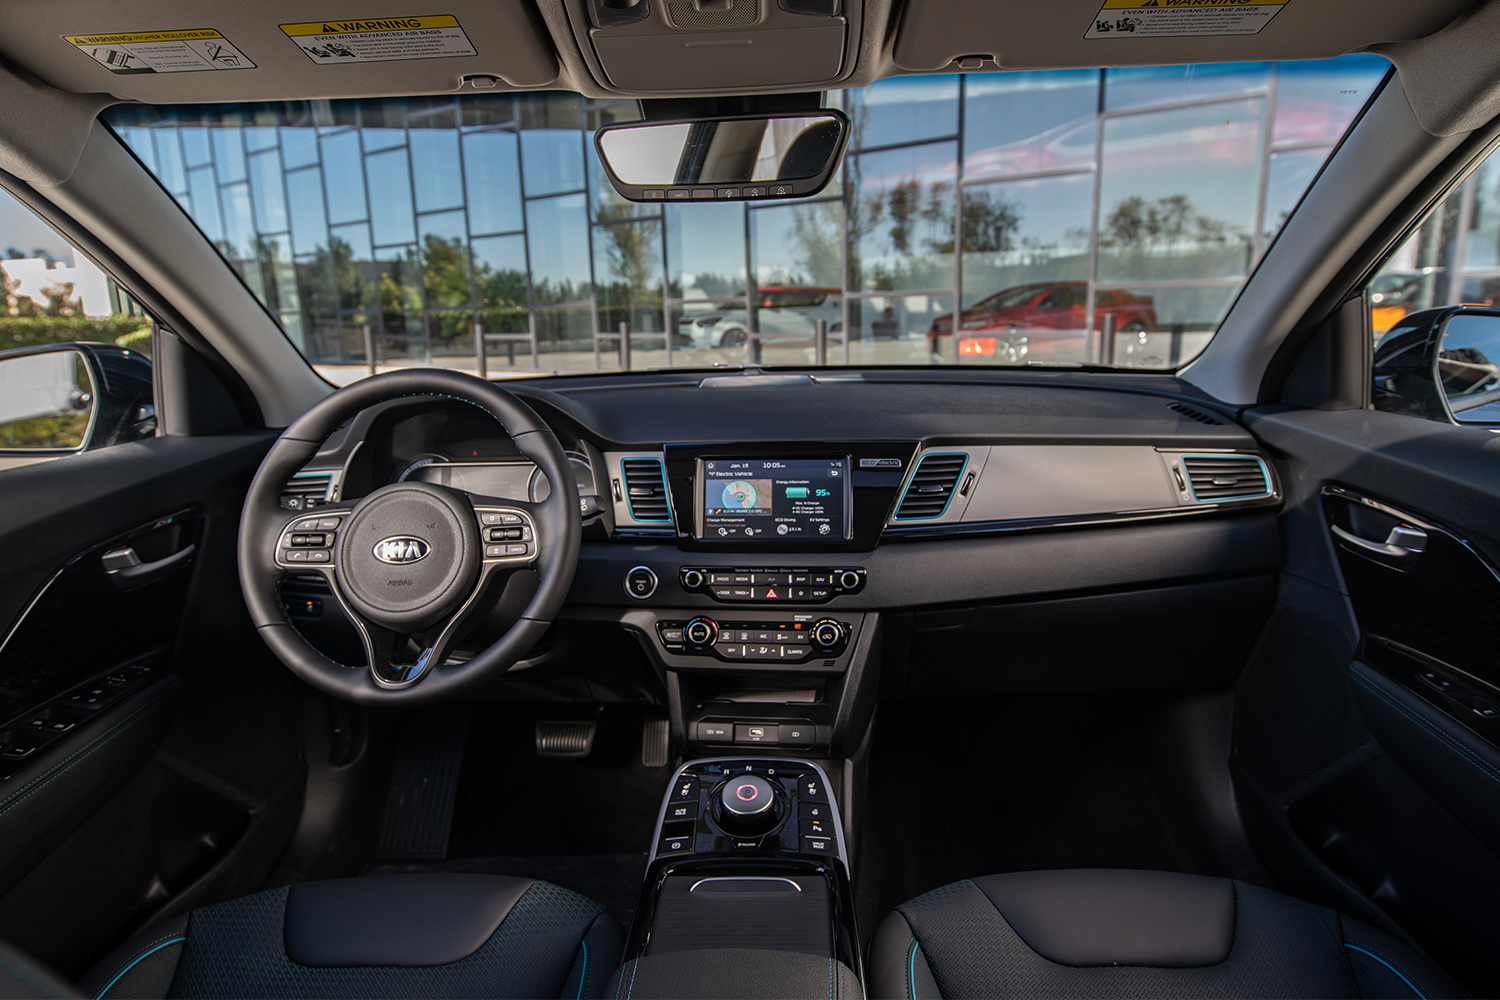 The view from the front seats of the Kia Niro EV, including the car's dashboard